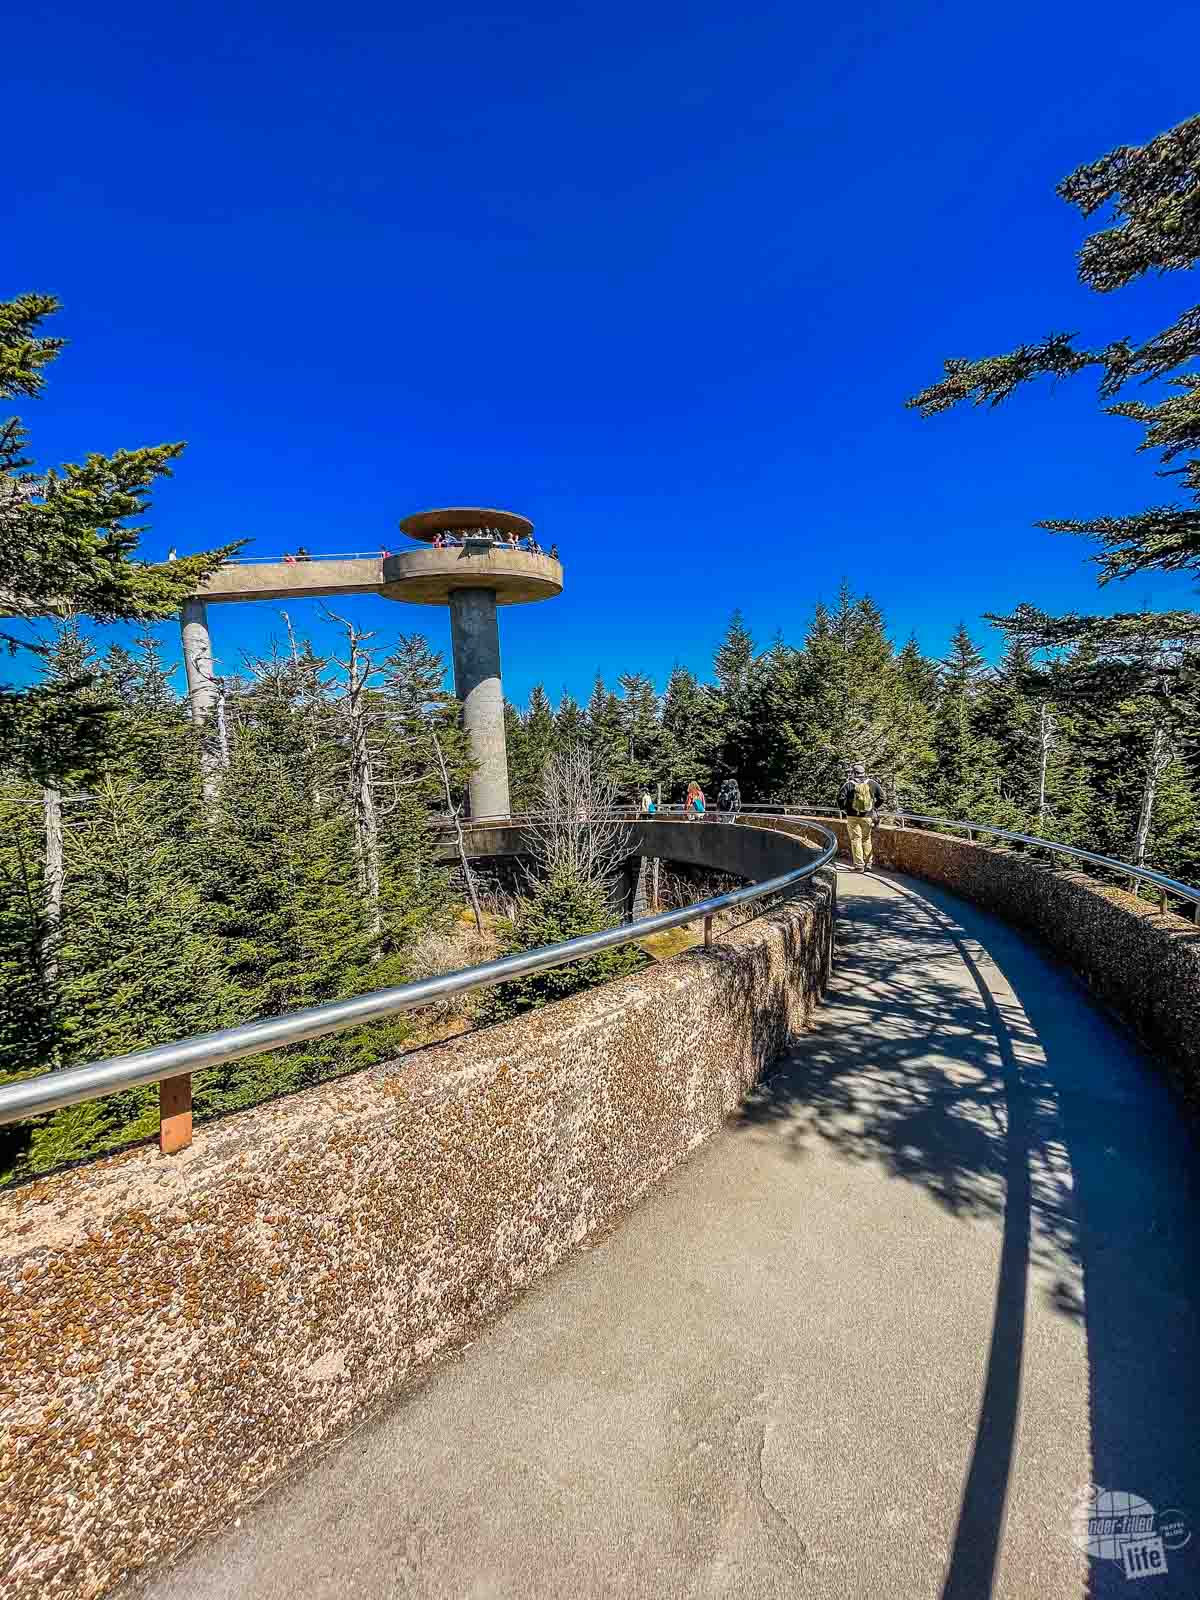 The observation tower at Clingmans Dome